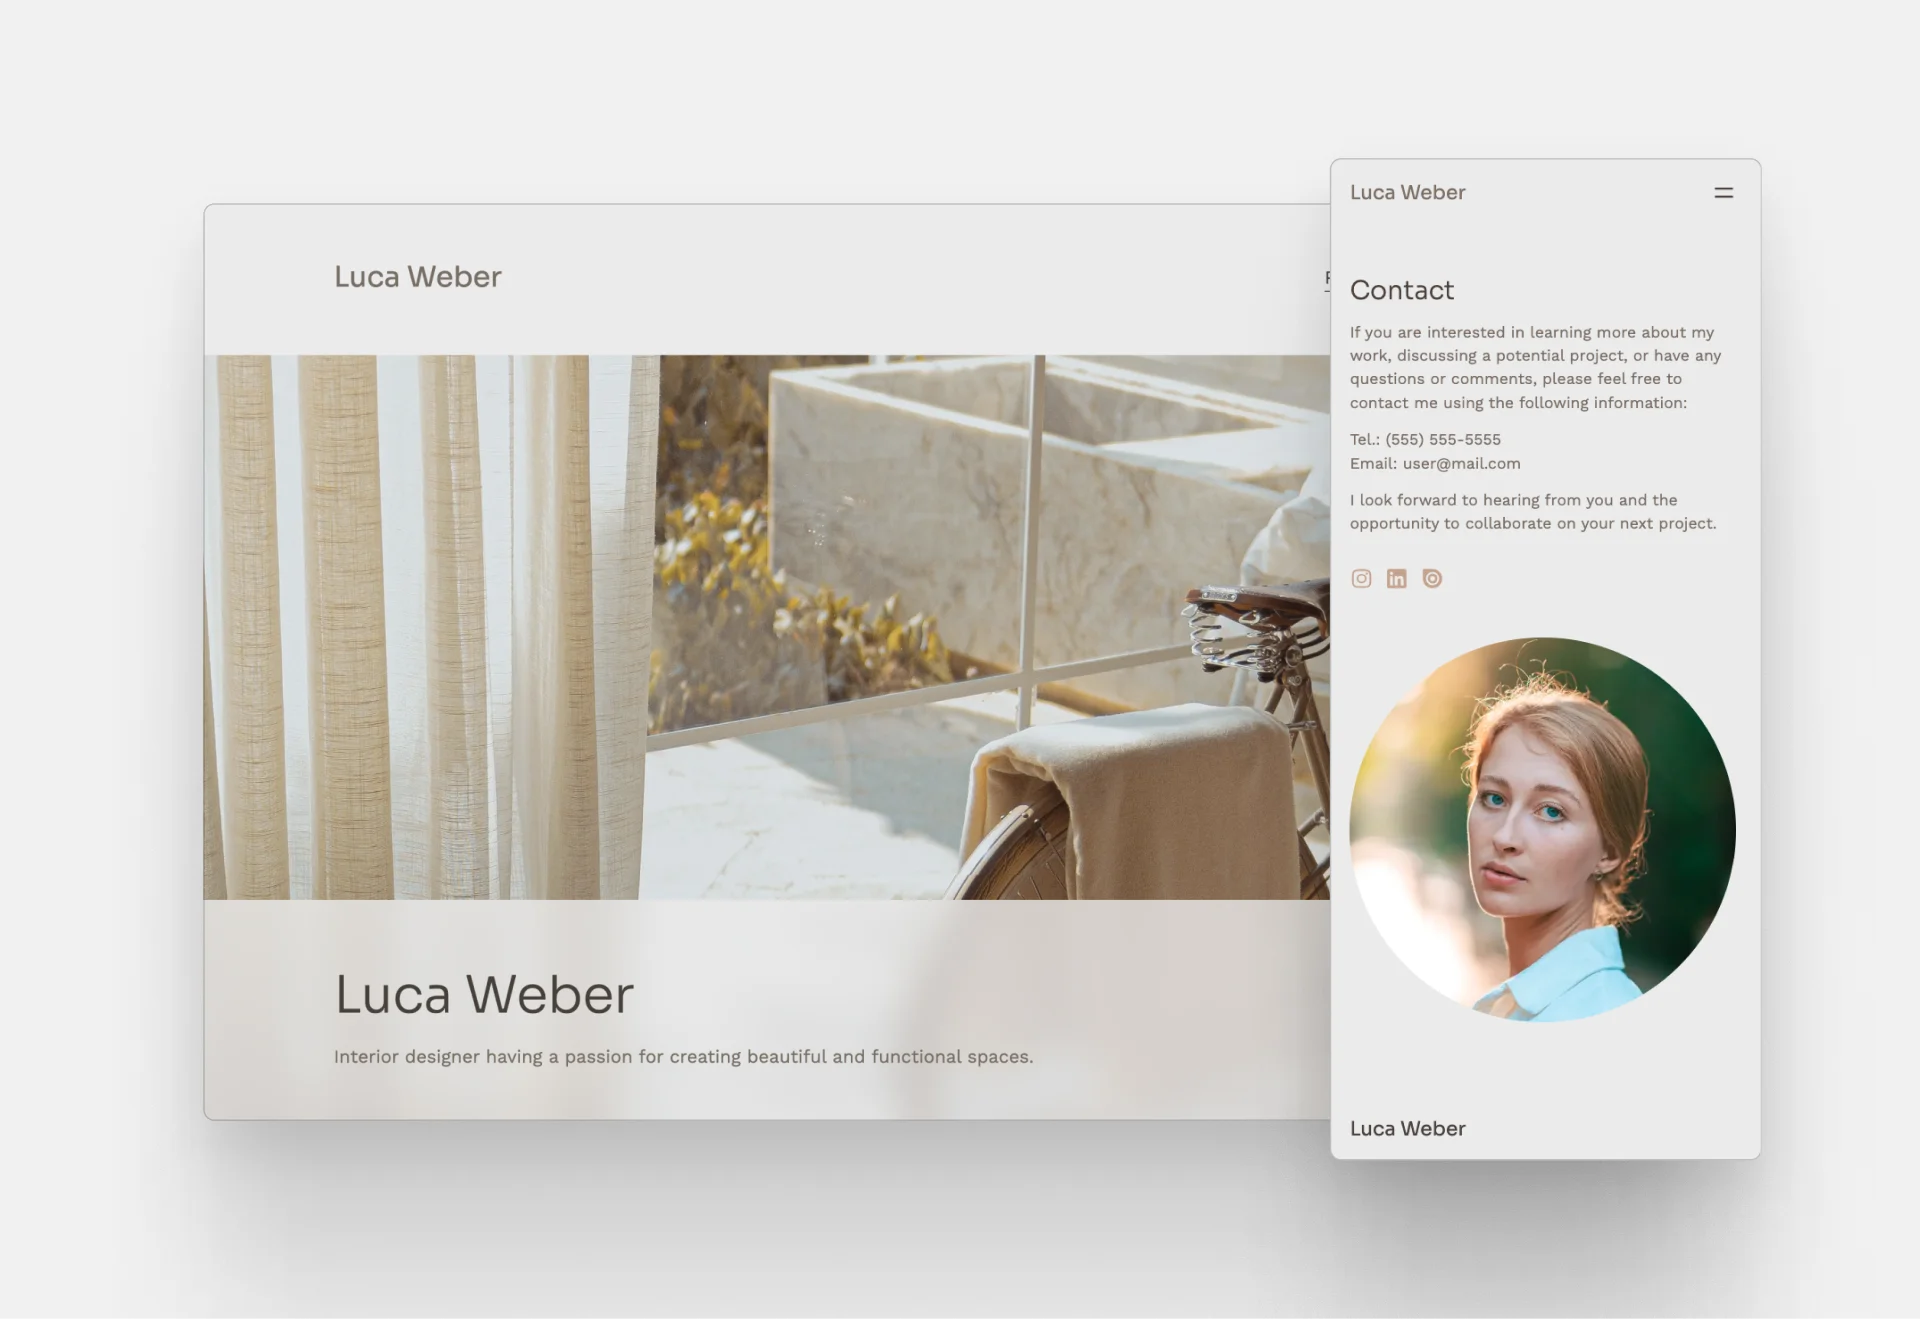 screenshots of the home and contact page from a mock portfolio created with Archifolio